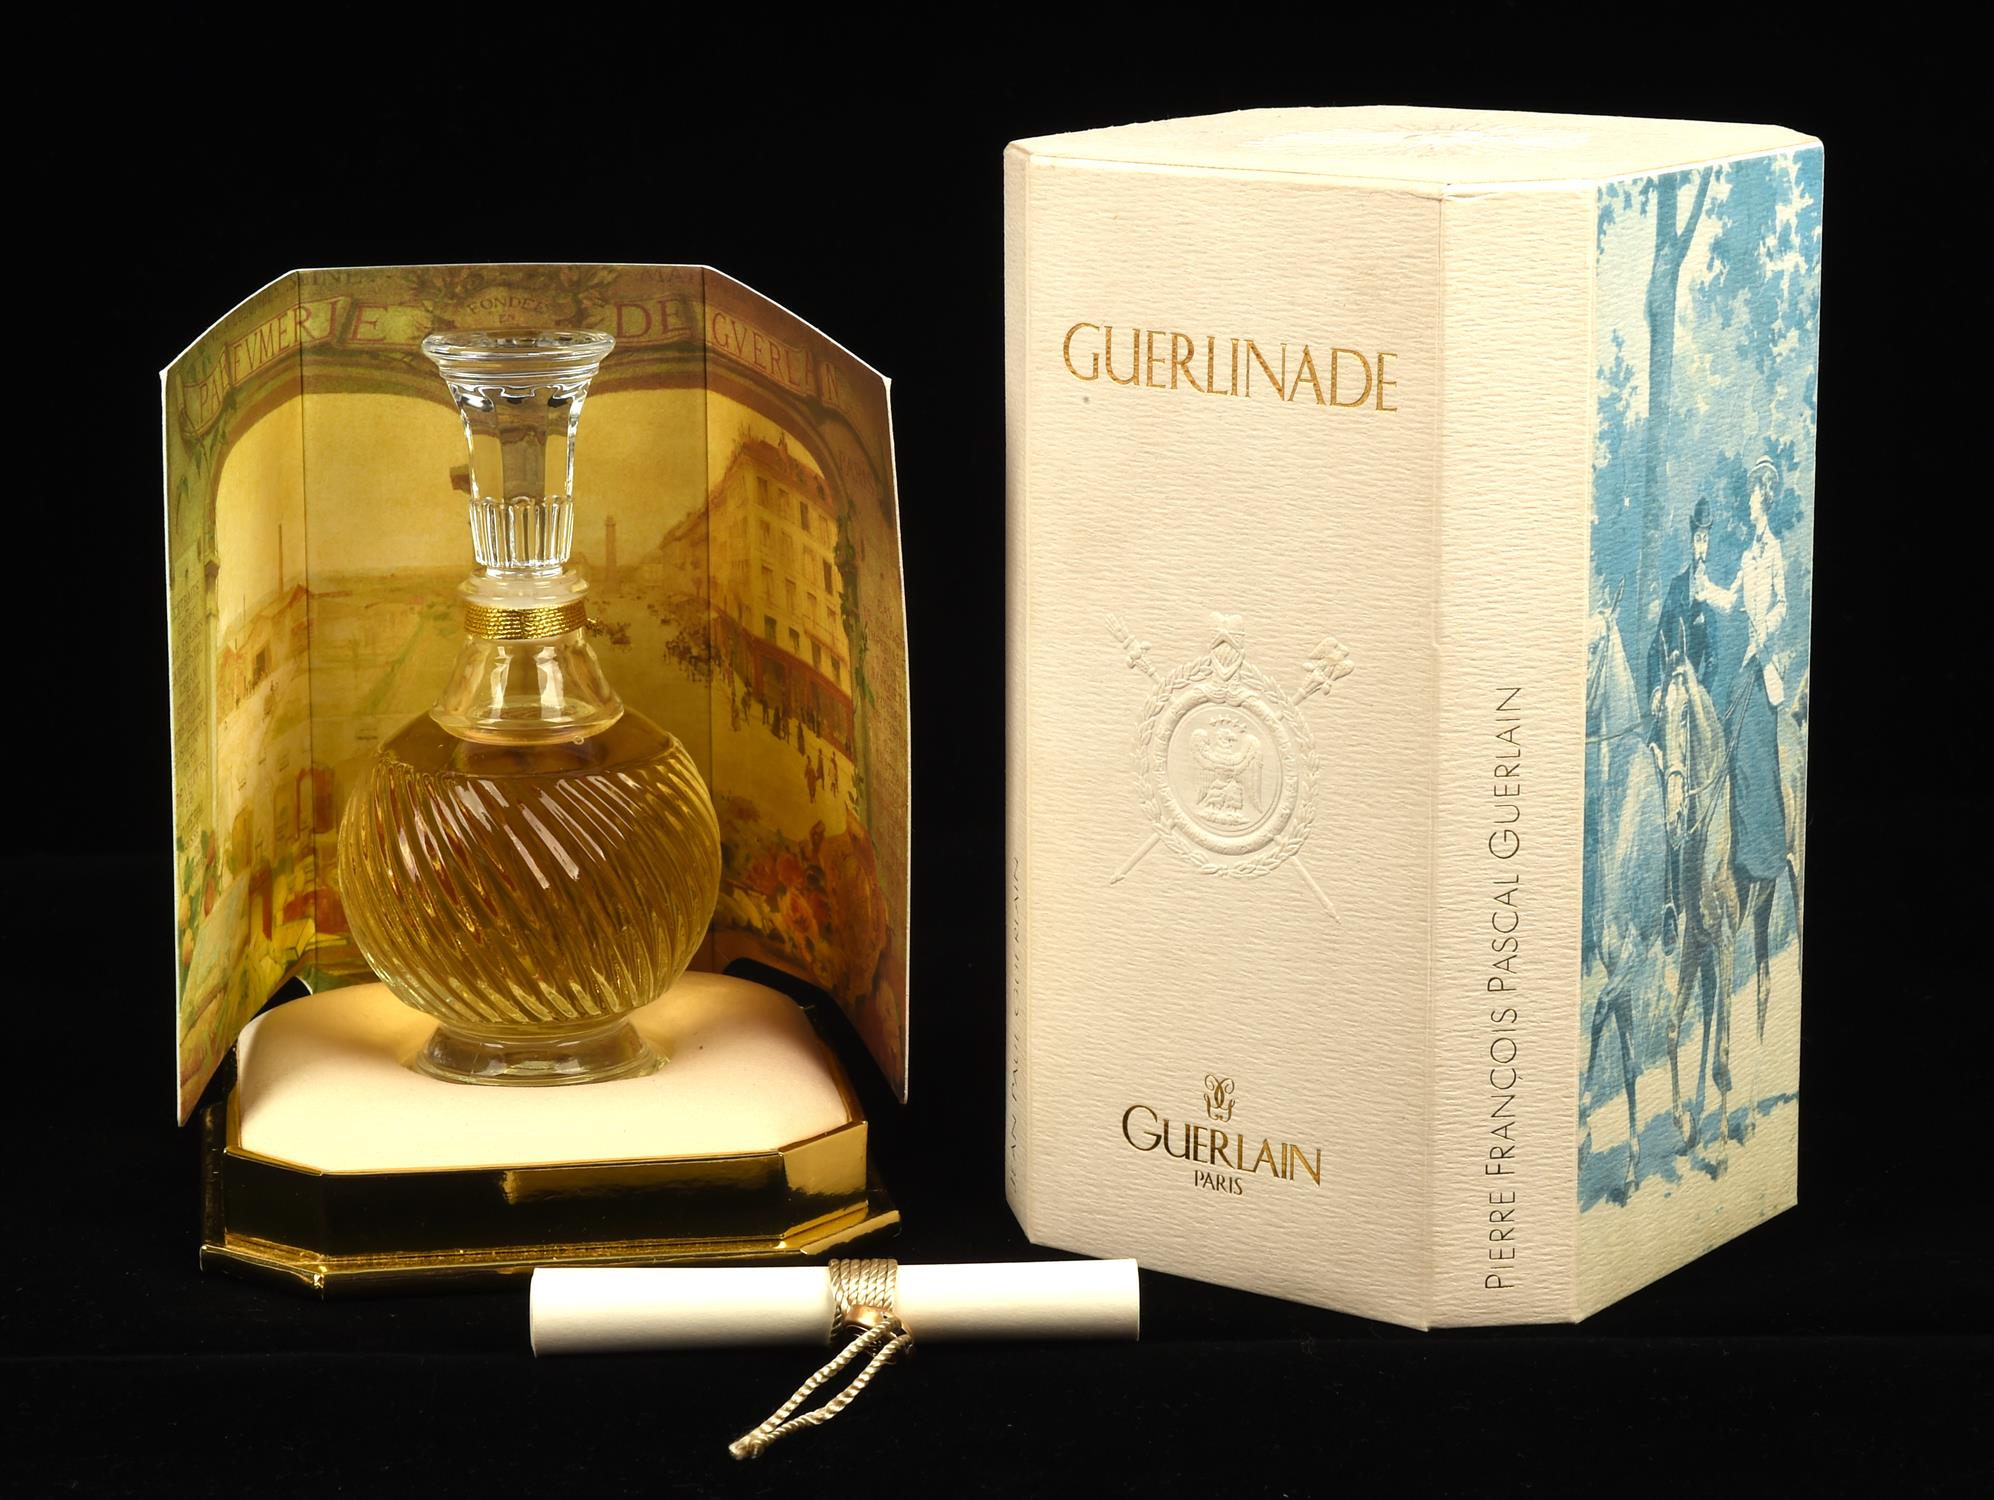 GUERLAIN GUERLINADE rare 1998 boxed re-issued renovation 1921 perfume bottled in a baccarat flacon - Image 3 of 3